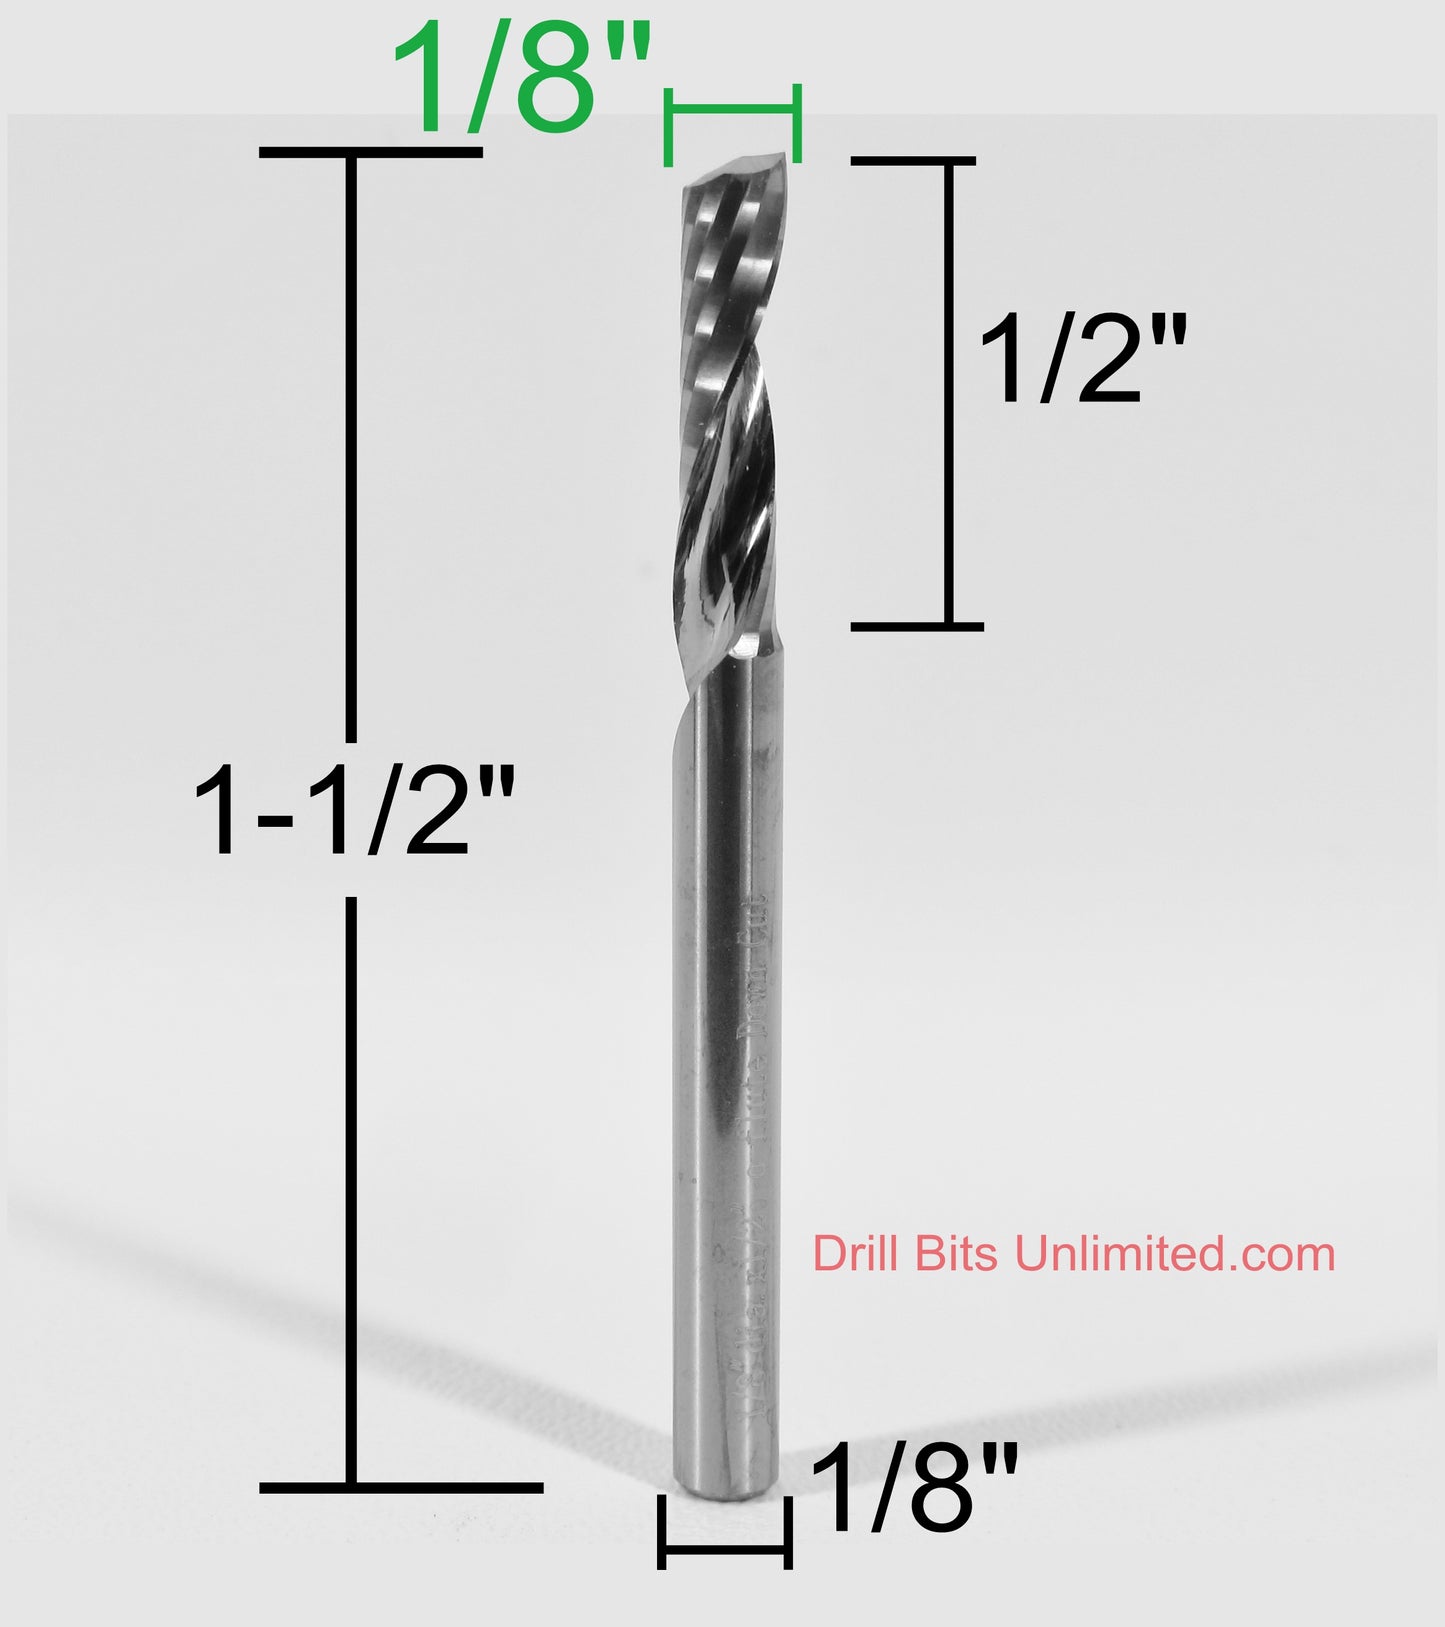 End Mill for cnc machining plastic, acrylic, aluminum and soft metals.